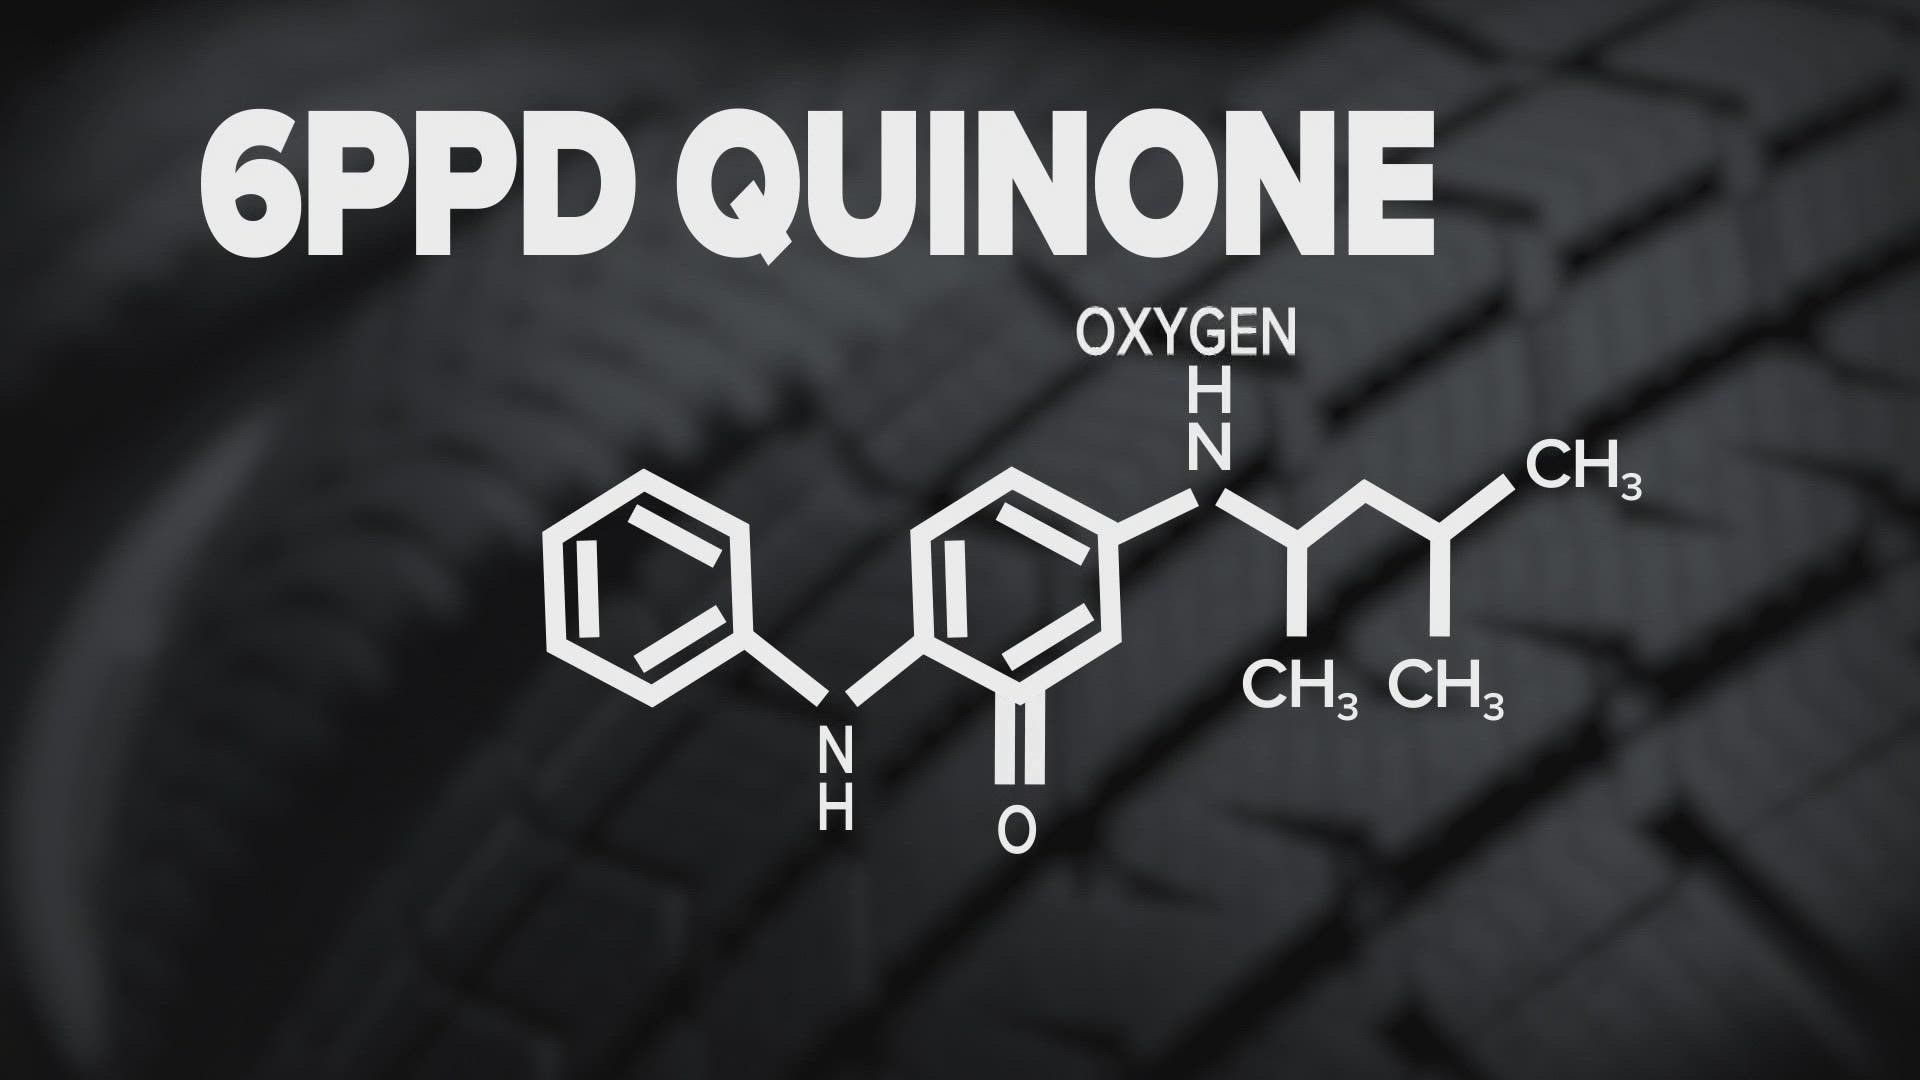 The organic chemical 6PPD-Quinone is commonly found in tires. As those tires age, they shed rubber that ends up in waterways and has been linked to salmon deaths.